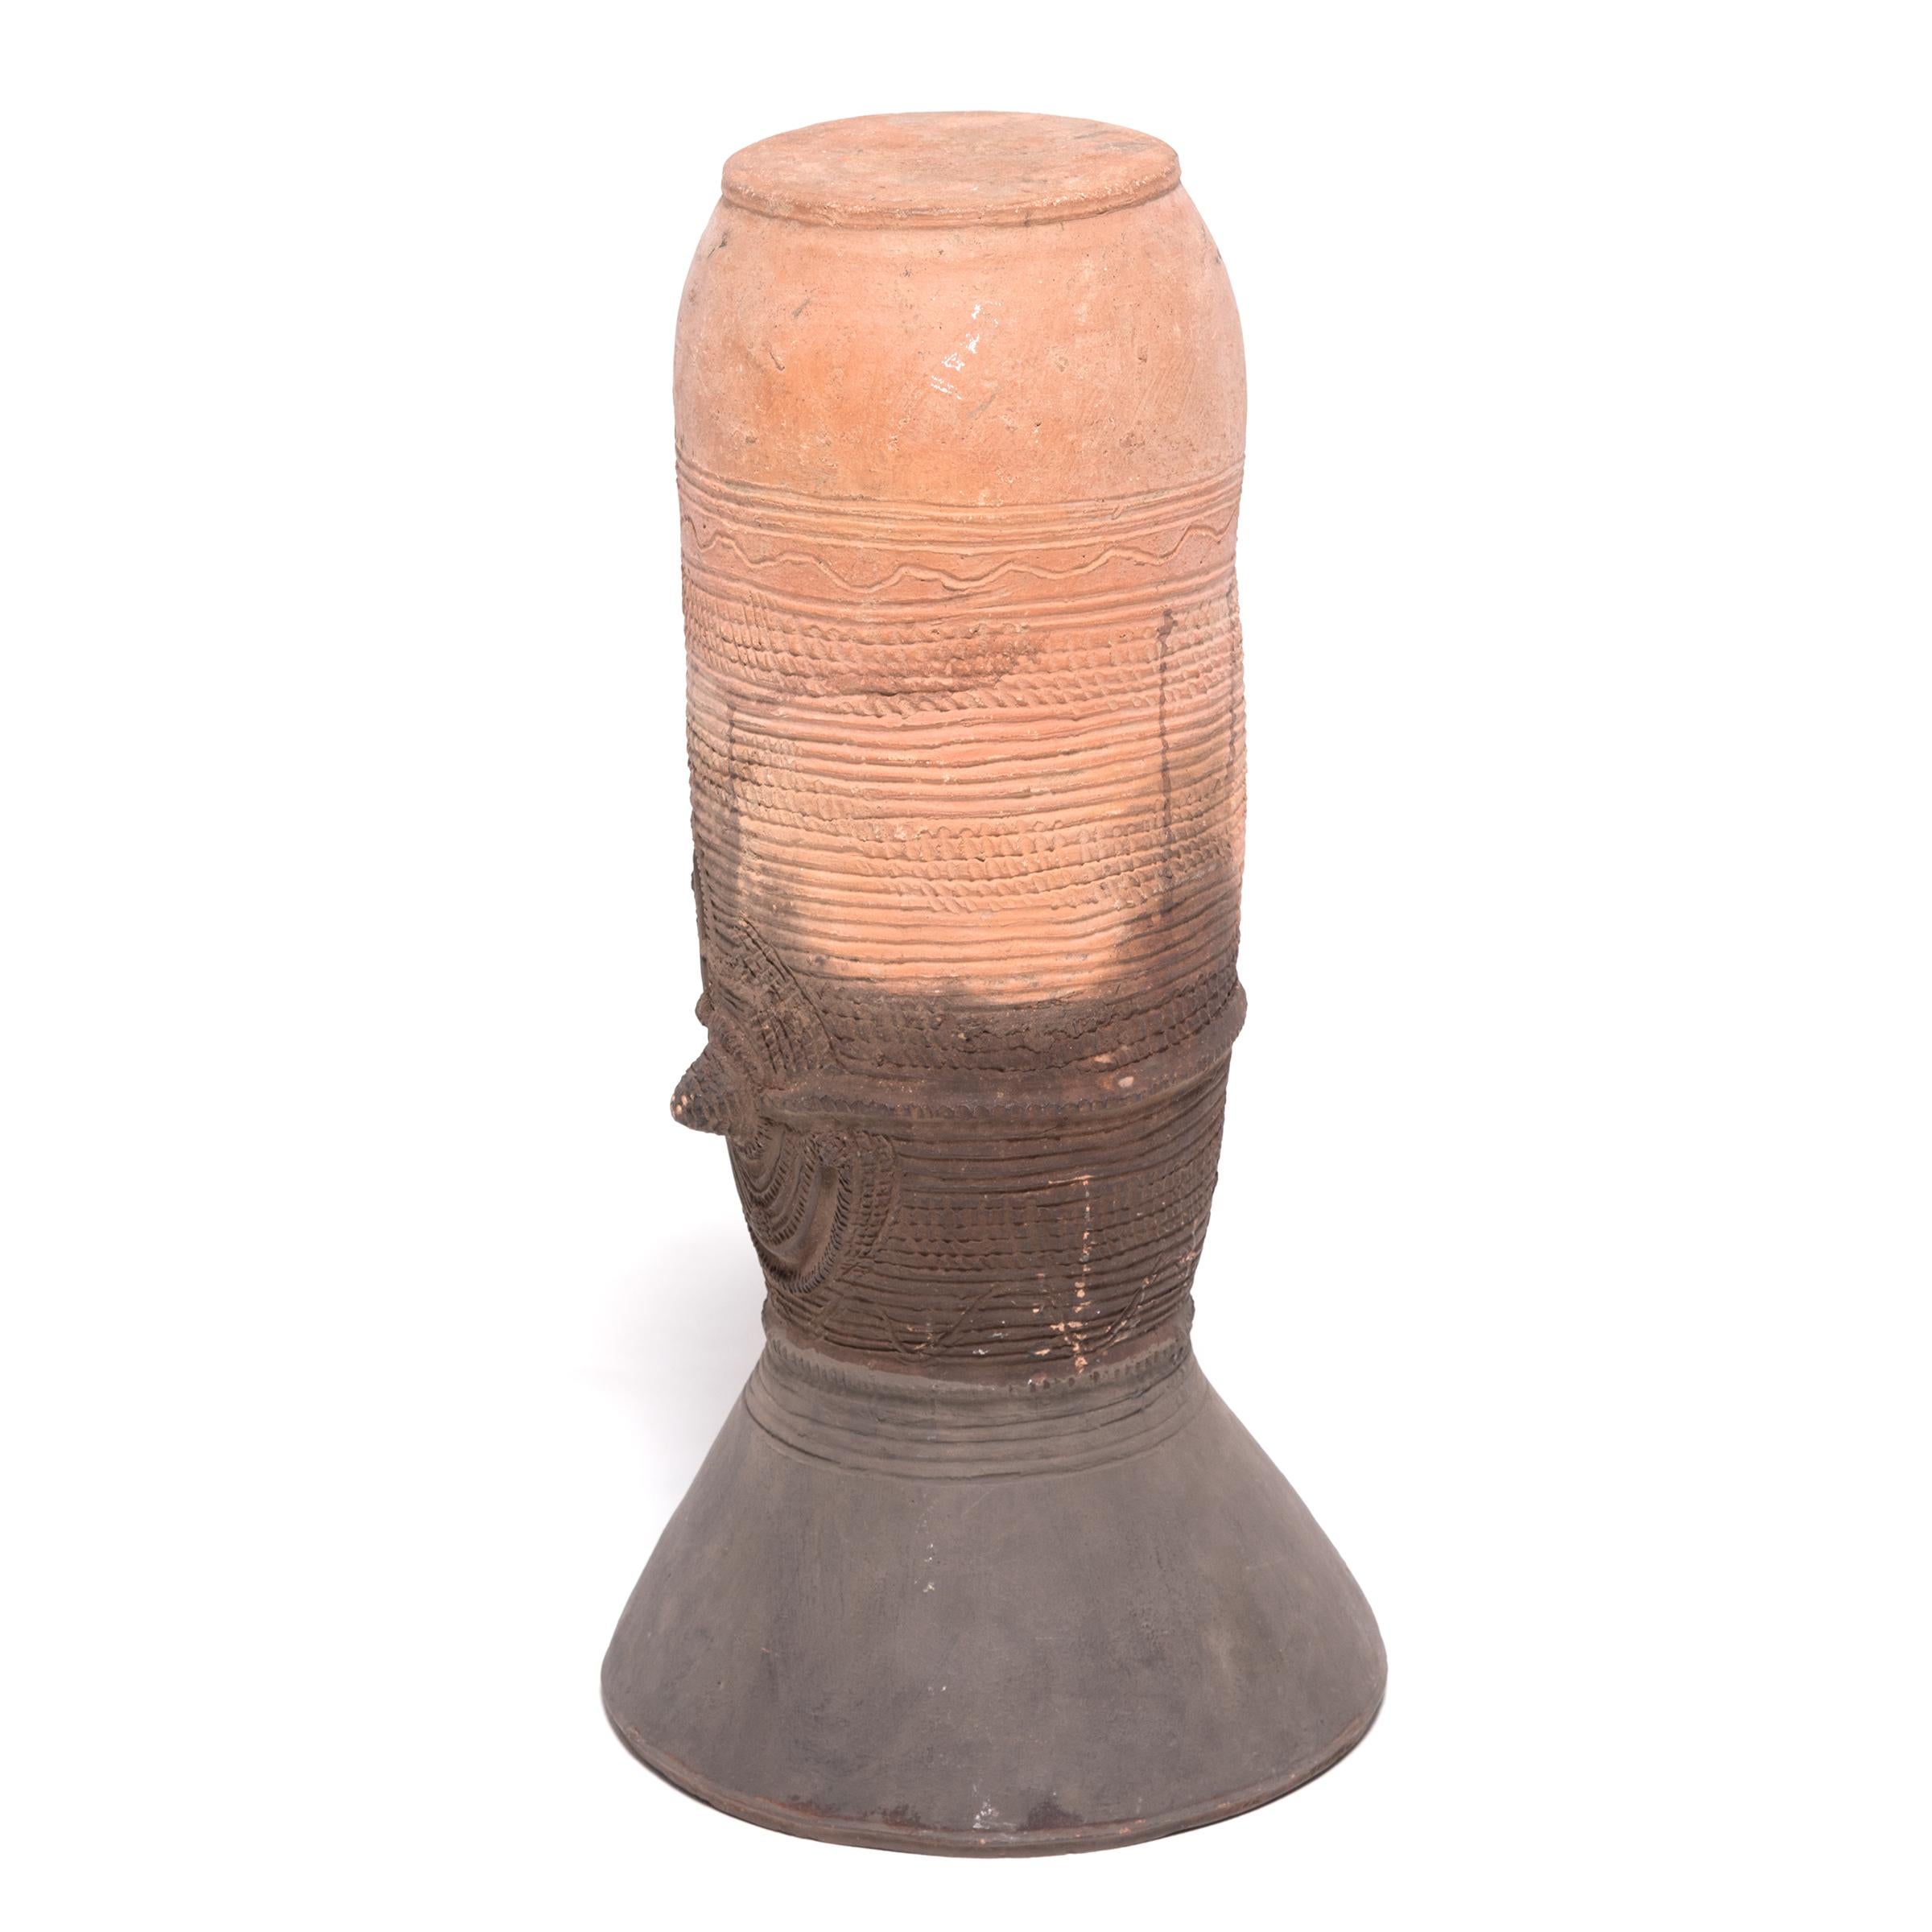 The Nupe people of Nigeria were touted as some of the finest ceramicists in Africa. Everyday objects like this elegant, cylindrical vessel support received detailed attention. This flaring terra cotta form would have been buried halfway in the